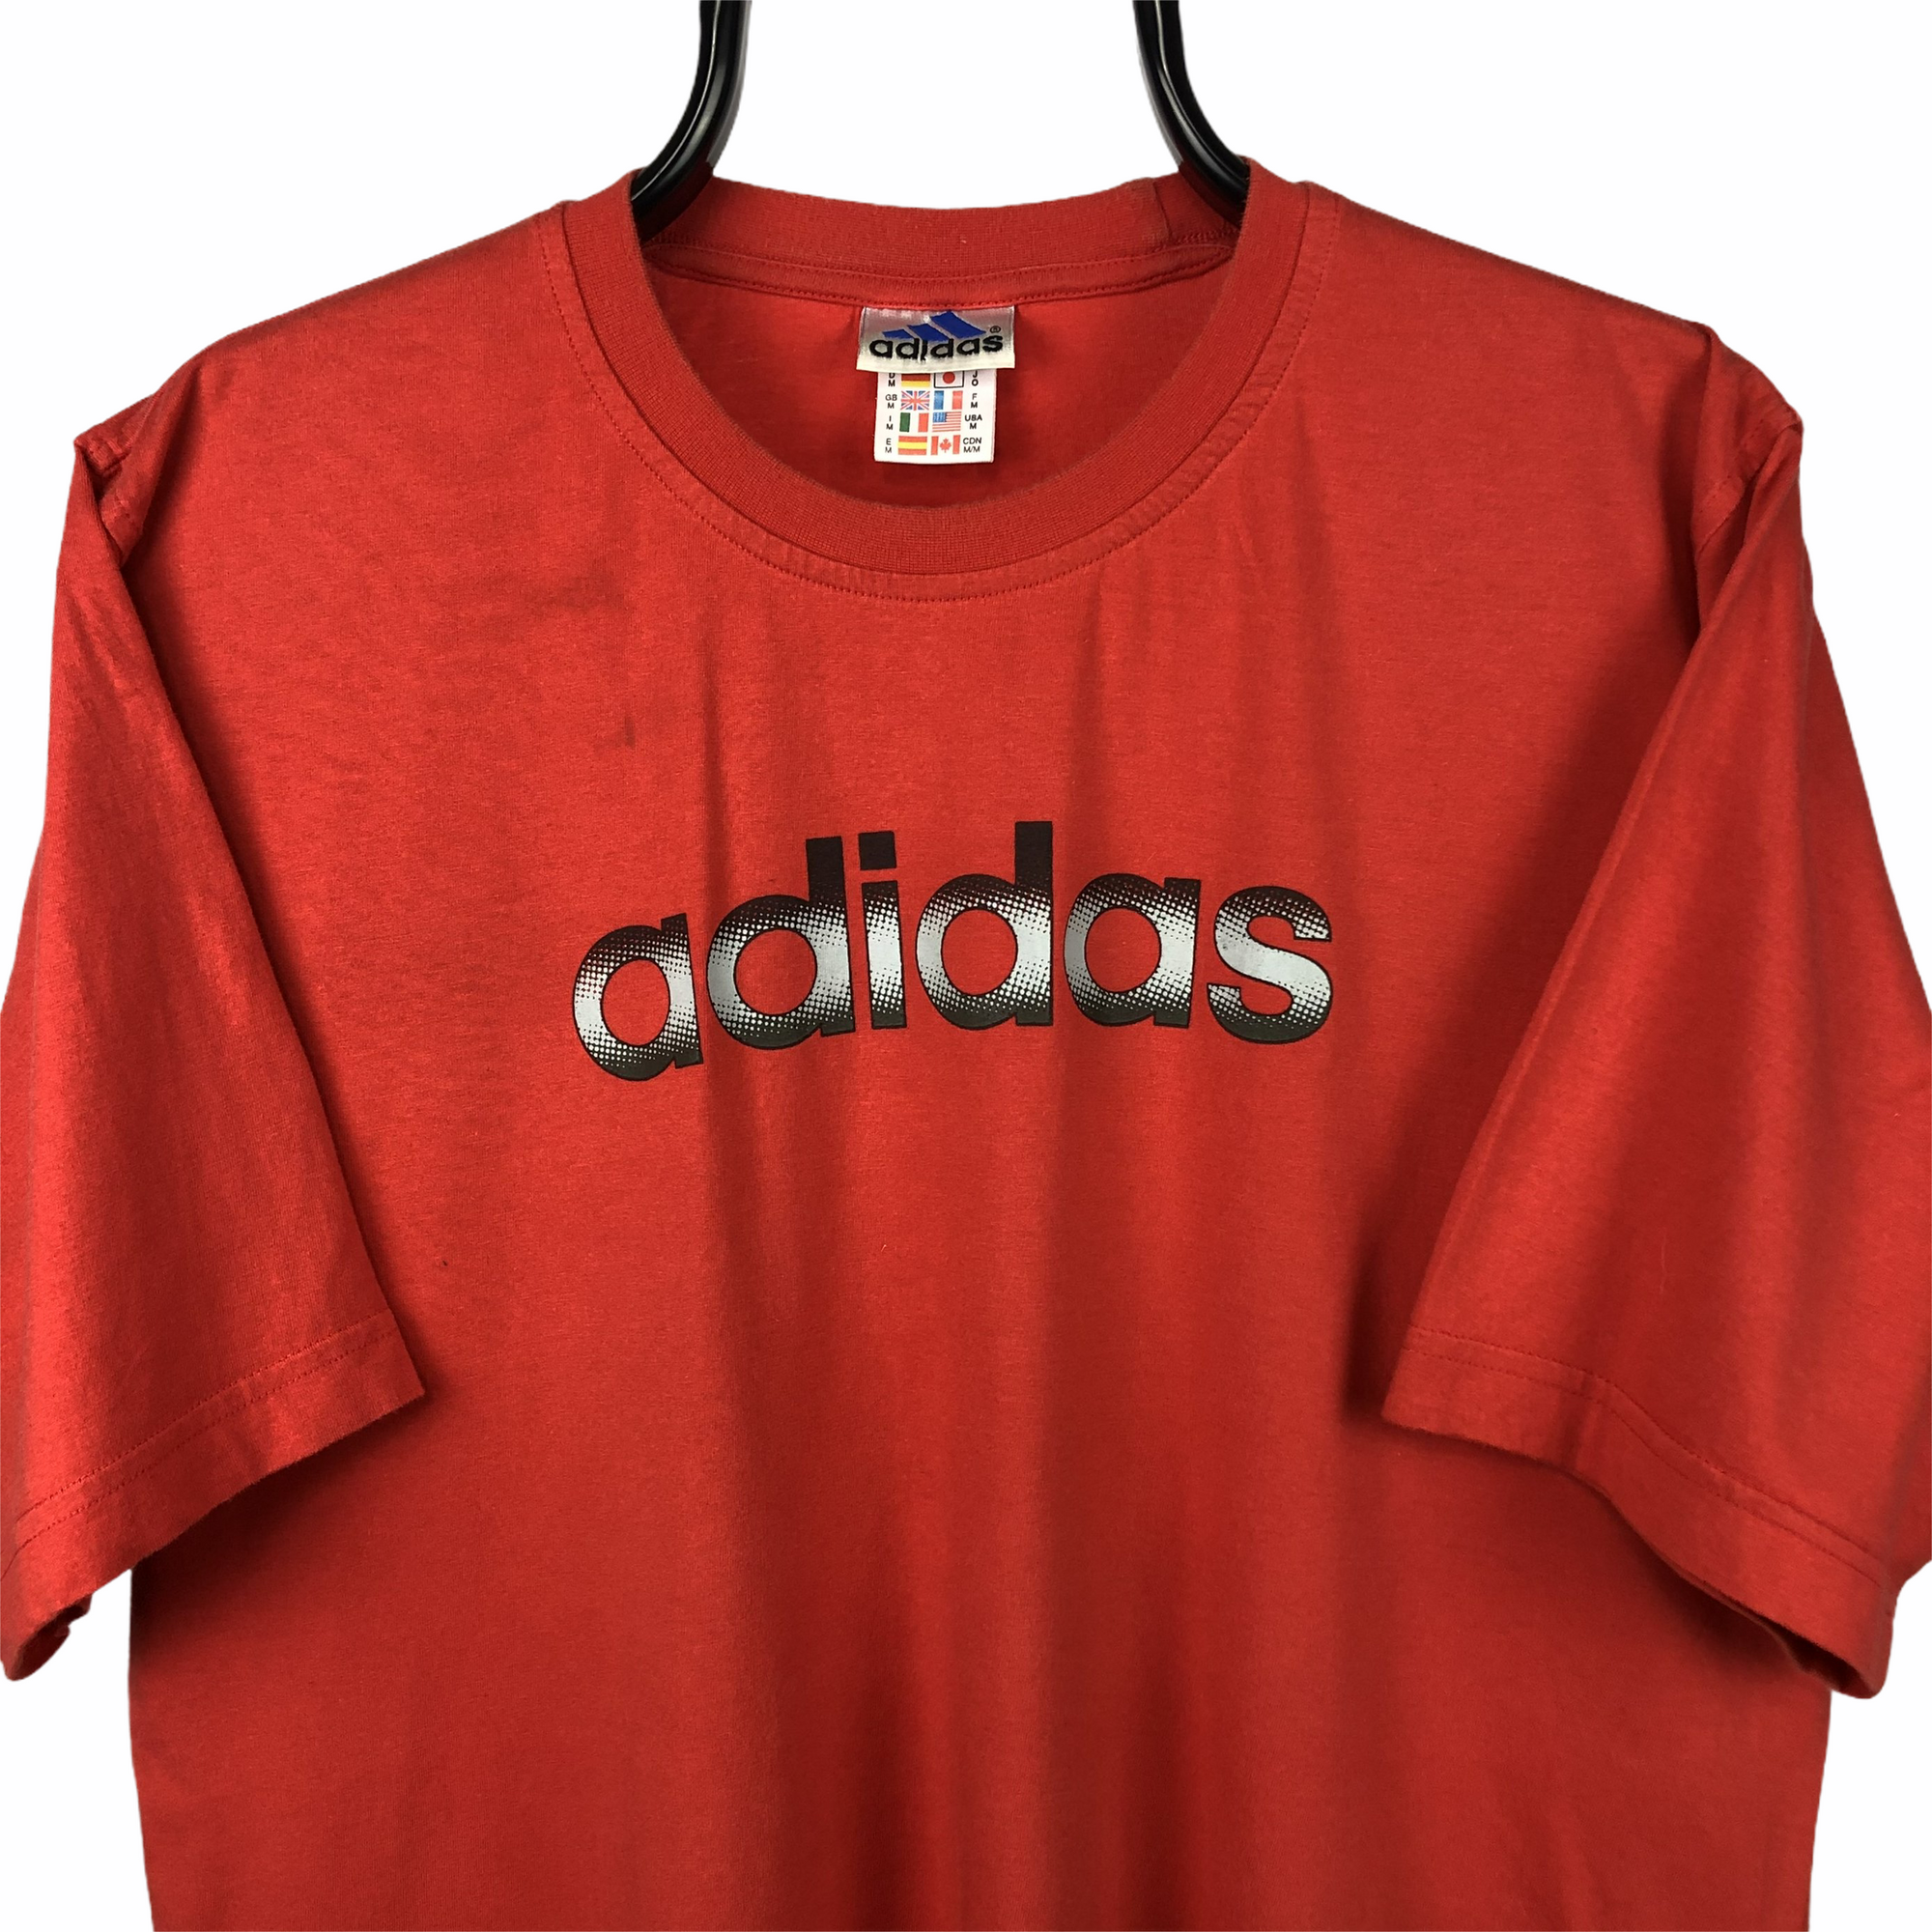 Vintage 90s Adidas Spellout Tee in Red - Men's Large/Women's XL